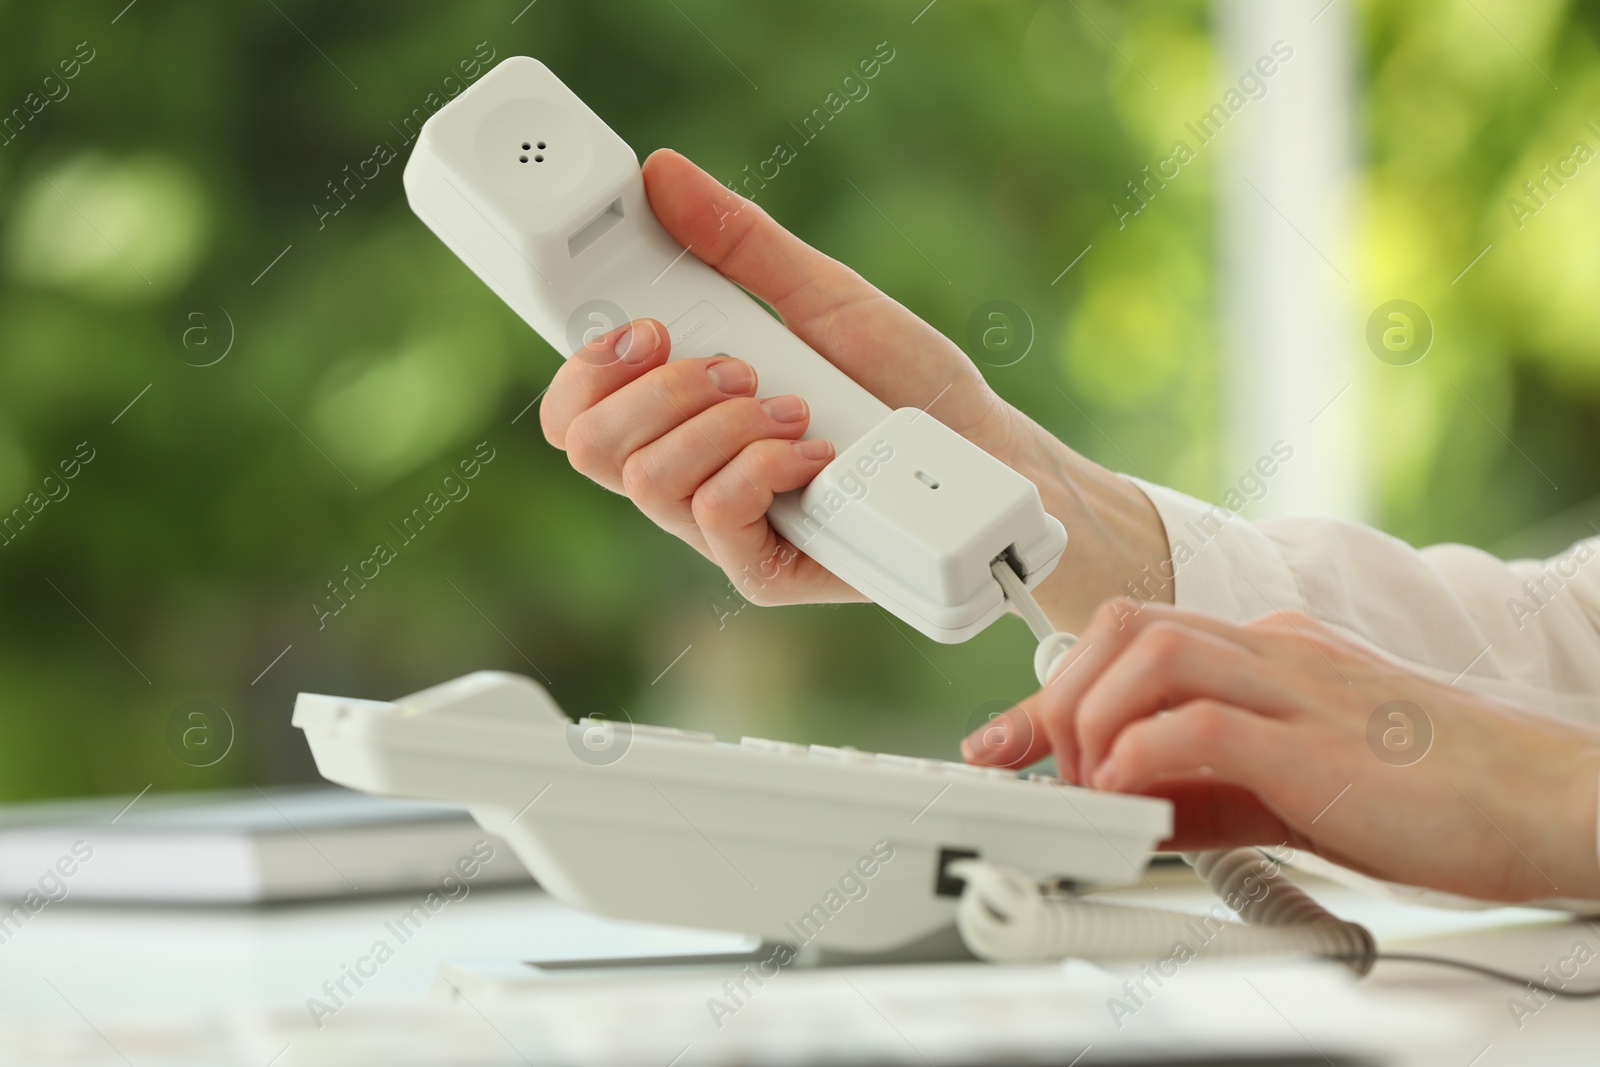 Photo of Assistant dialing number on telephone at white table, closeup